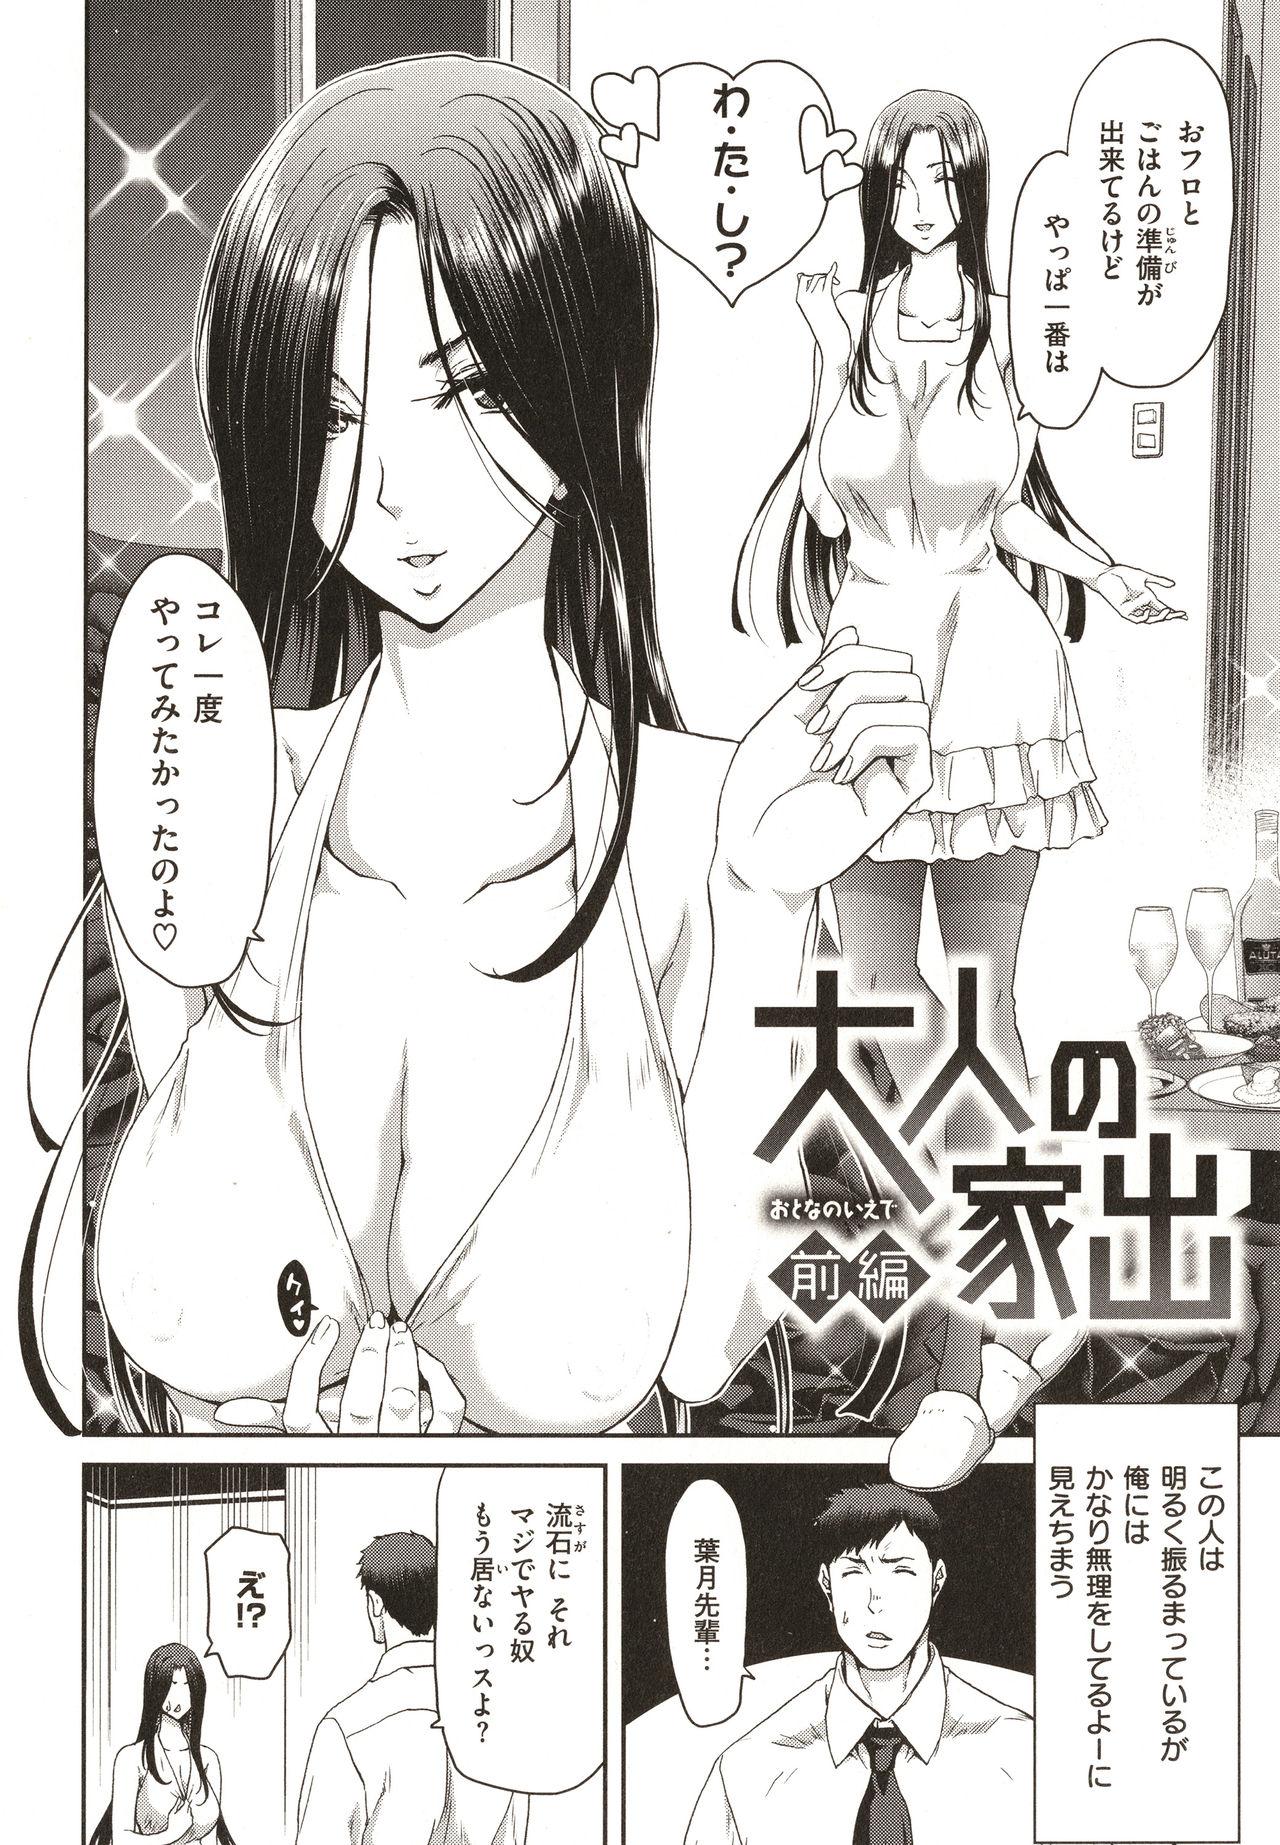 Female Iede Onna o Hirottara - When I picked up a runaway girl. Groping - Page 6